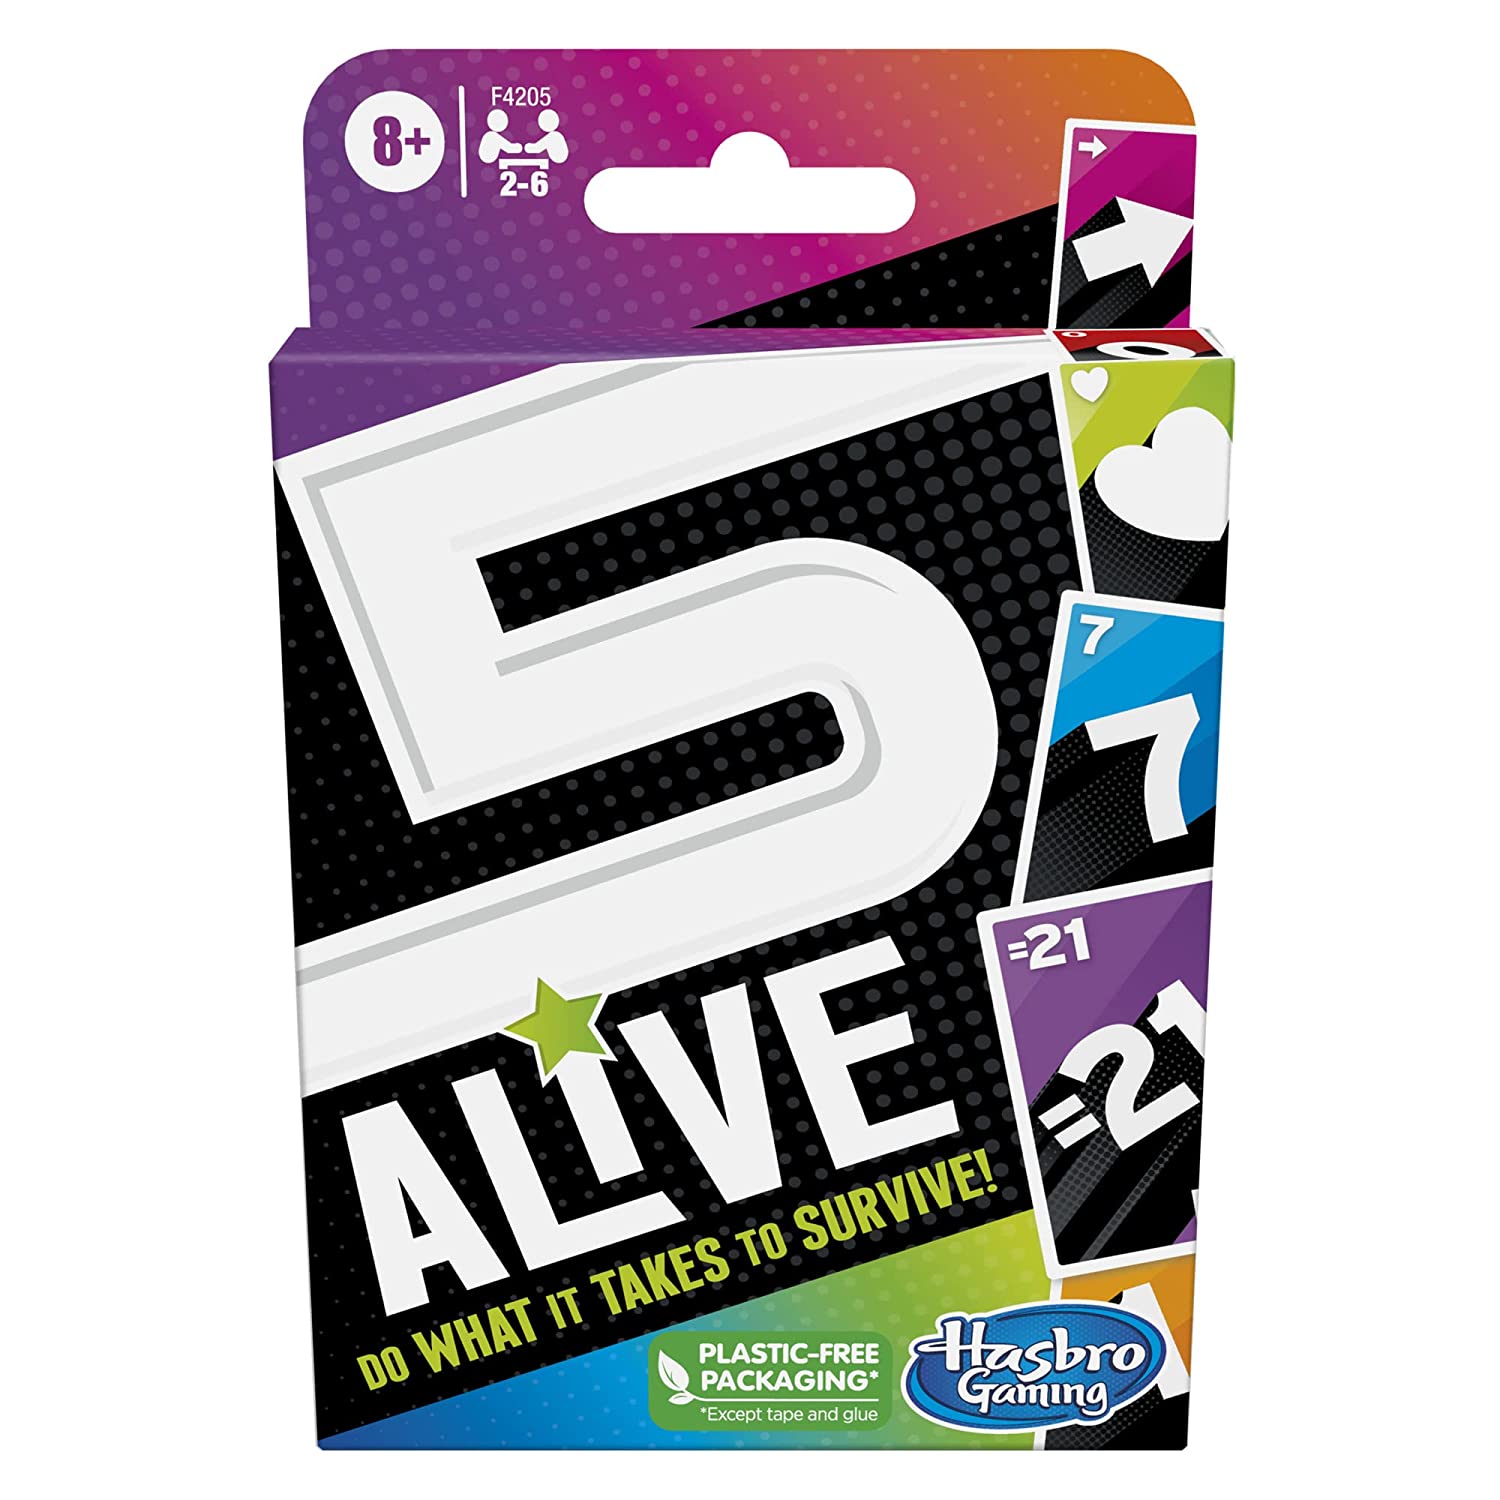 5 Alive Card Game - Hasbro Gaming 5 Alive Card Game - Fast-Paced Kids